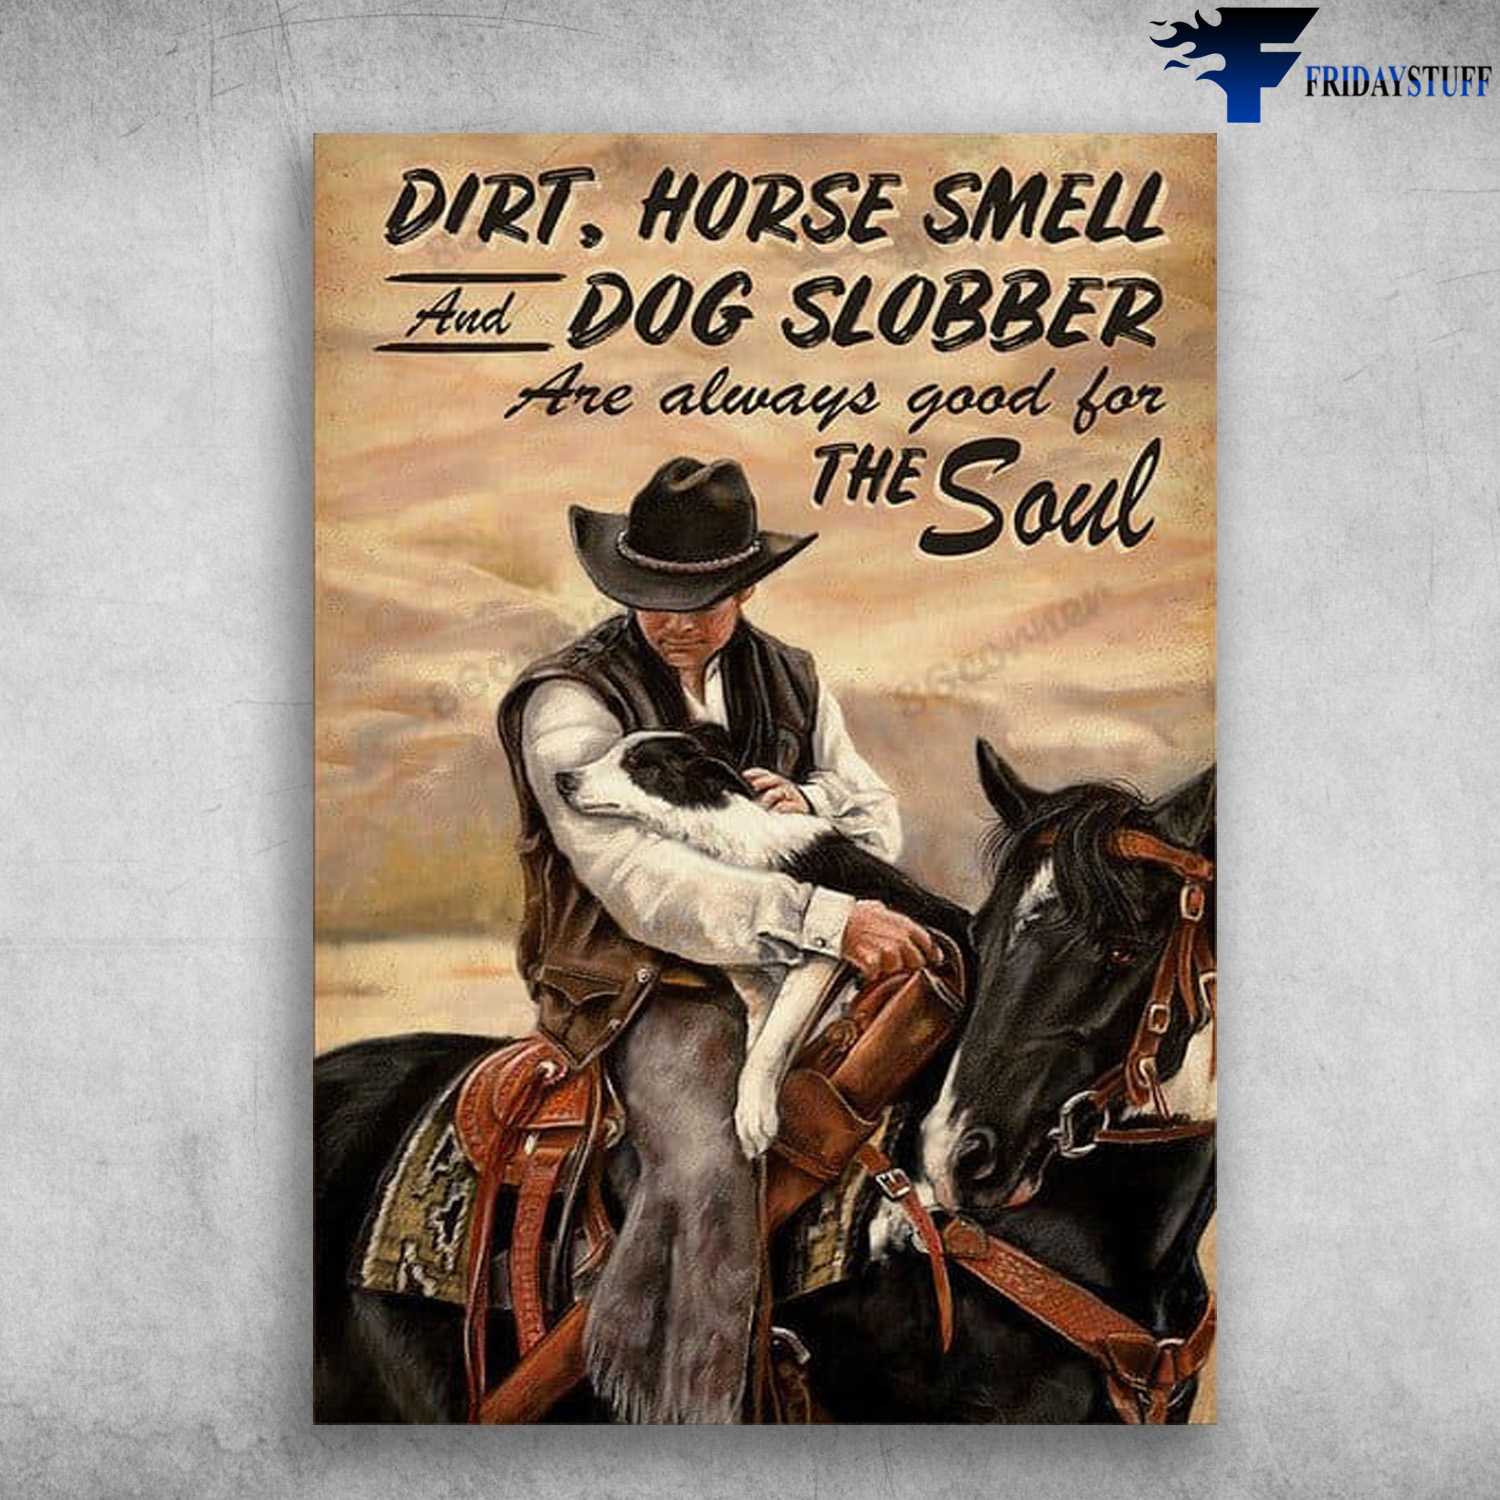 Cowboy Poster, Dog And Horse, Dirt, Horse Smell, And Dog Slobber, Are Always Good For The Soul